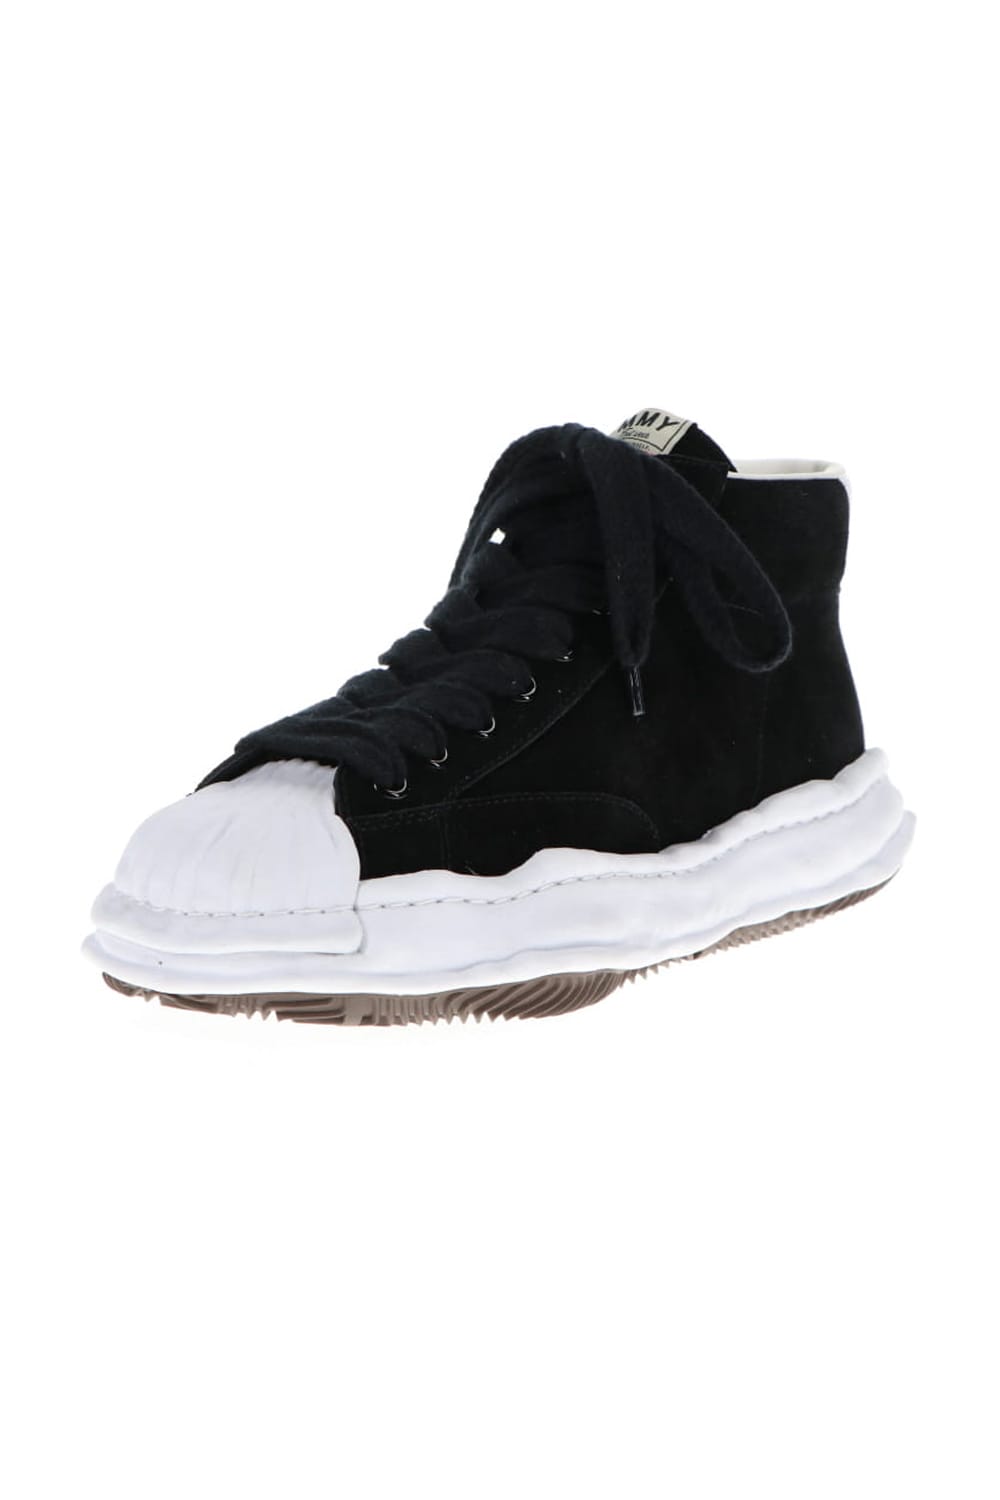 -BLAKEY high- original STC sole suede leather High-Top sneakers Black